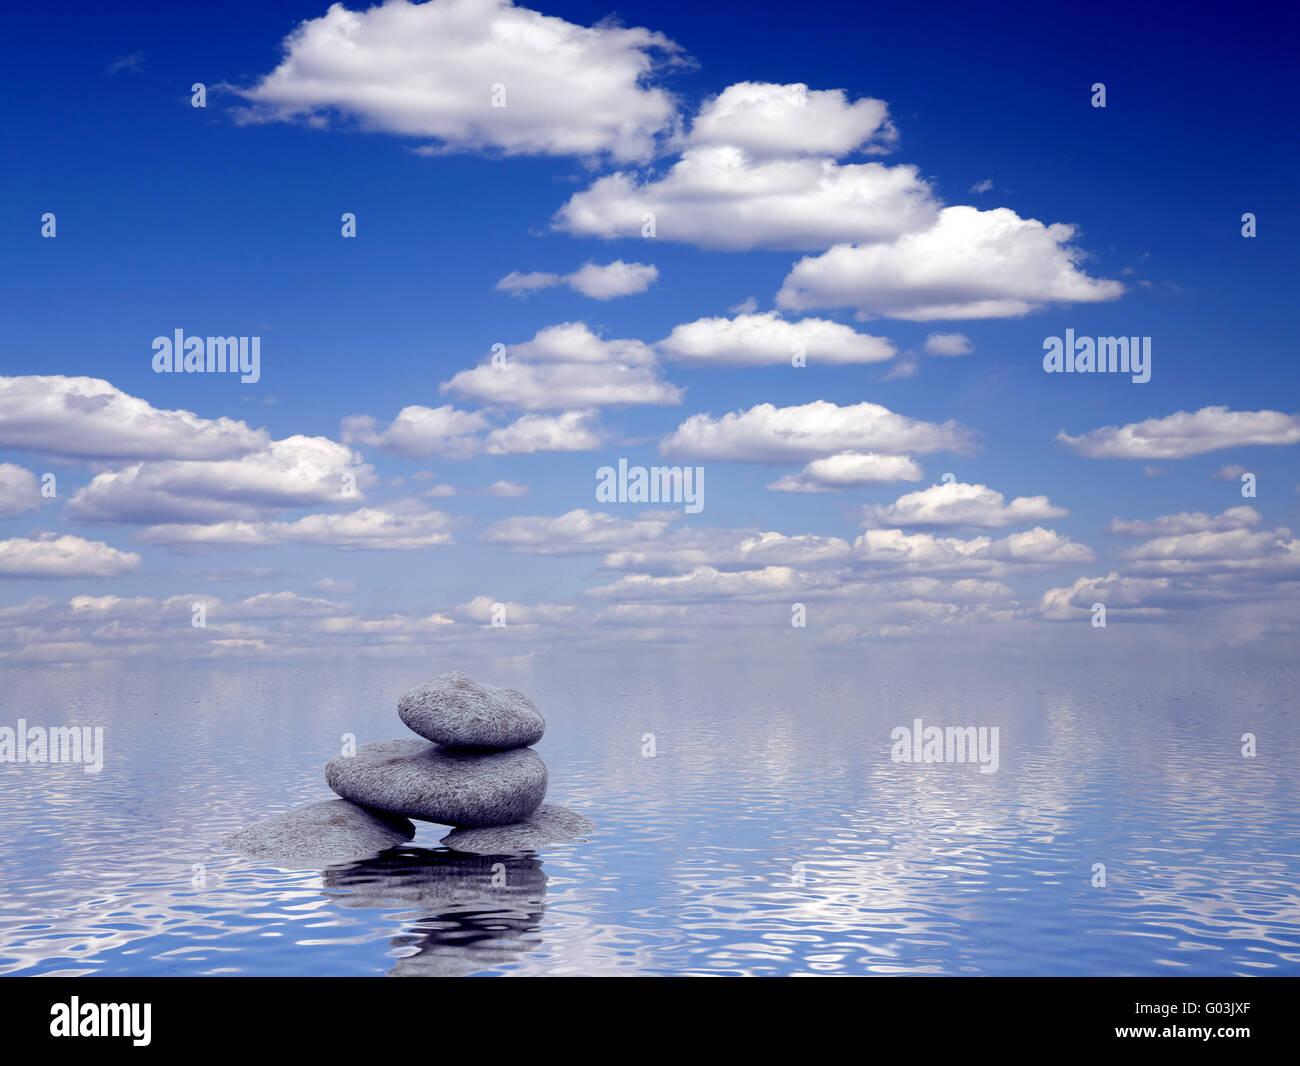 stones in water on a background bright blue sky Stock Photo